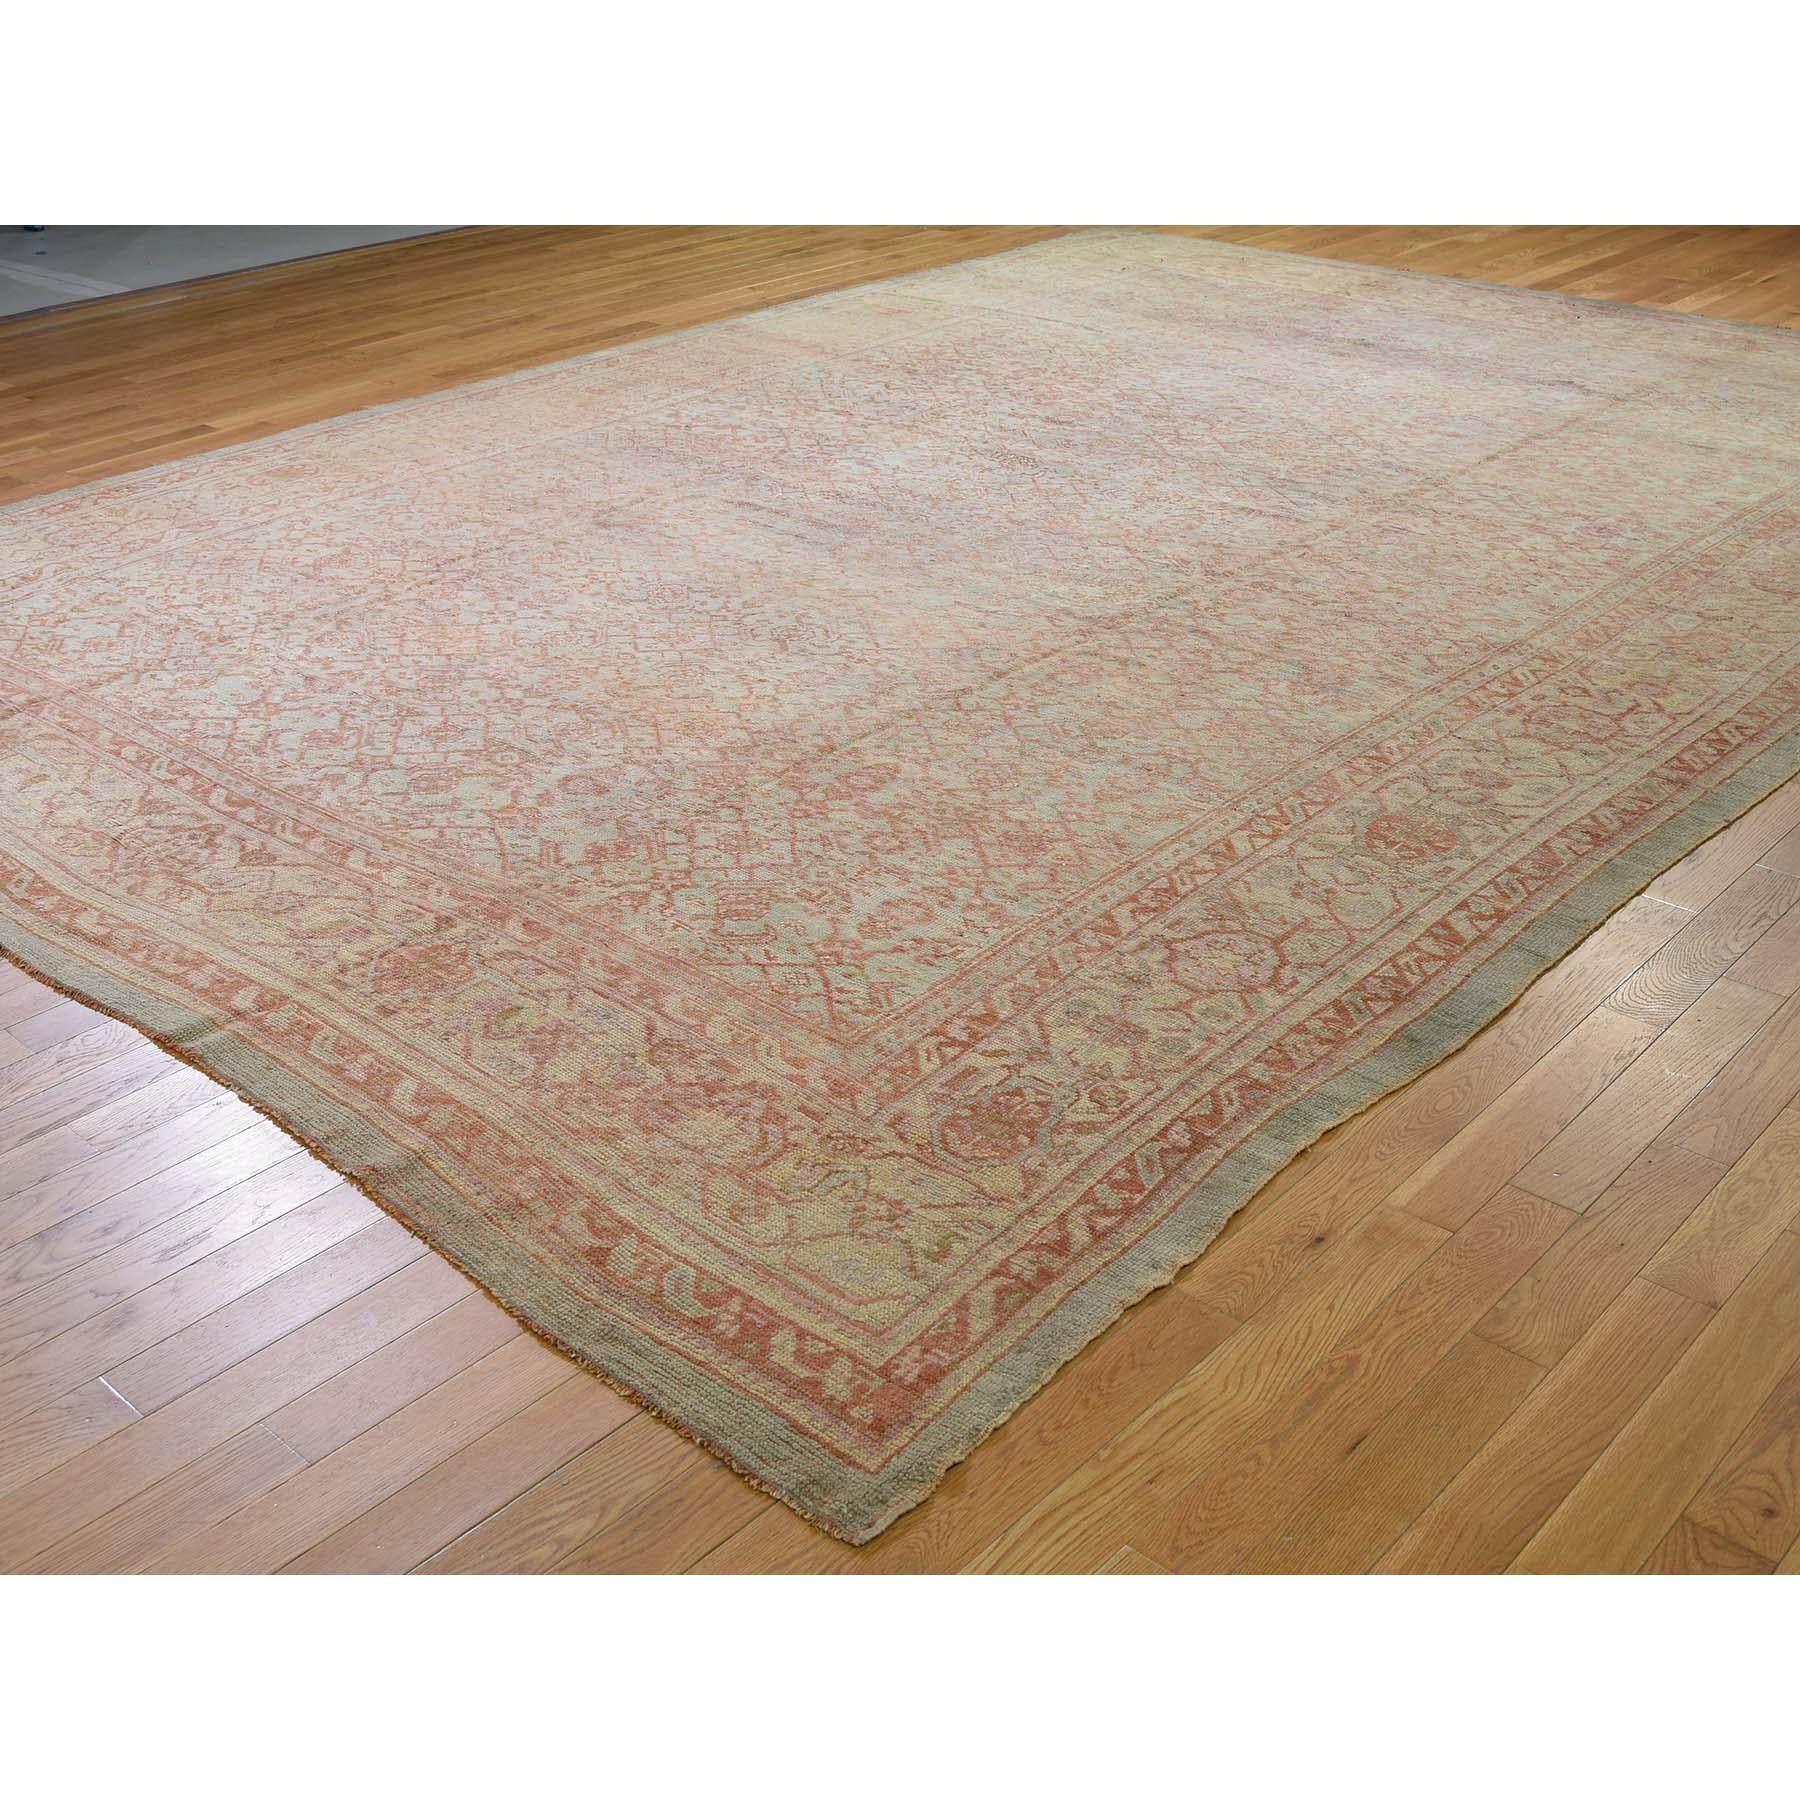 Oversized Antique Turkish Oushak Exc Condition Pure Wool Hand-Knotted Oriental In Good Condition For Sale In Carlstadt, NJ